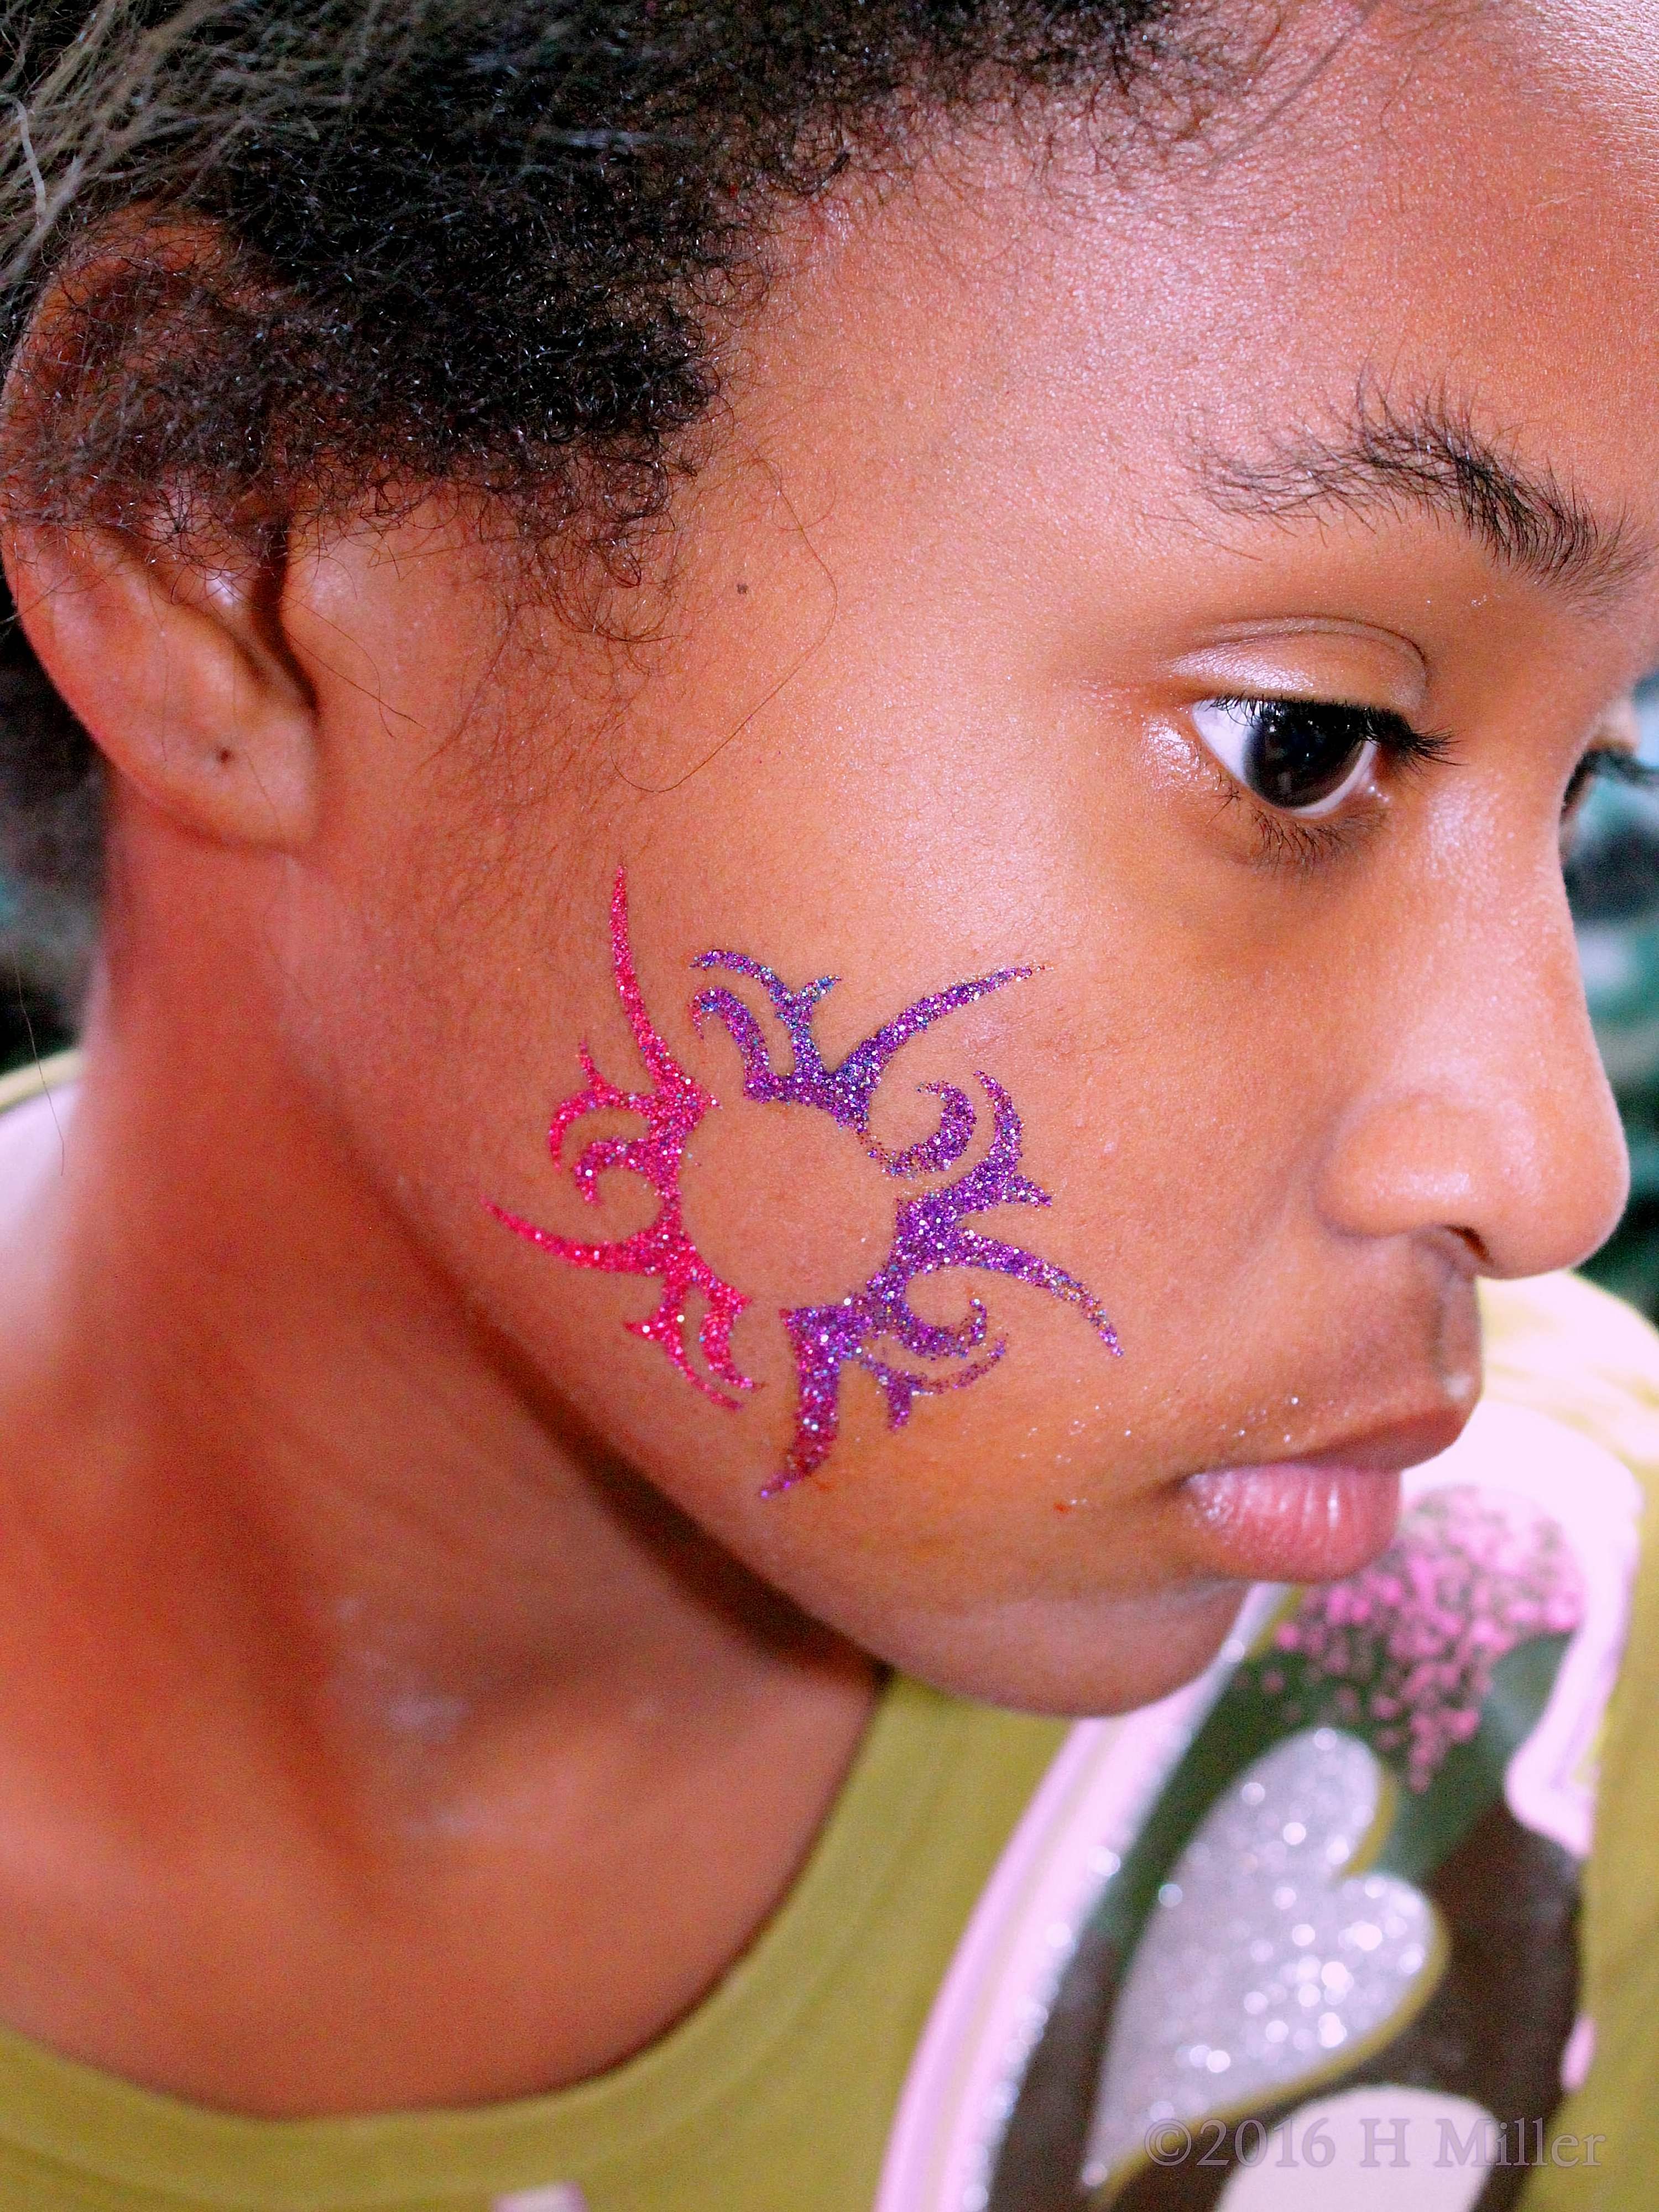 Cool Pink And Purple Glitter Temporary Tattoo At The Kids Spa Party! 